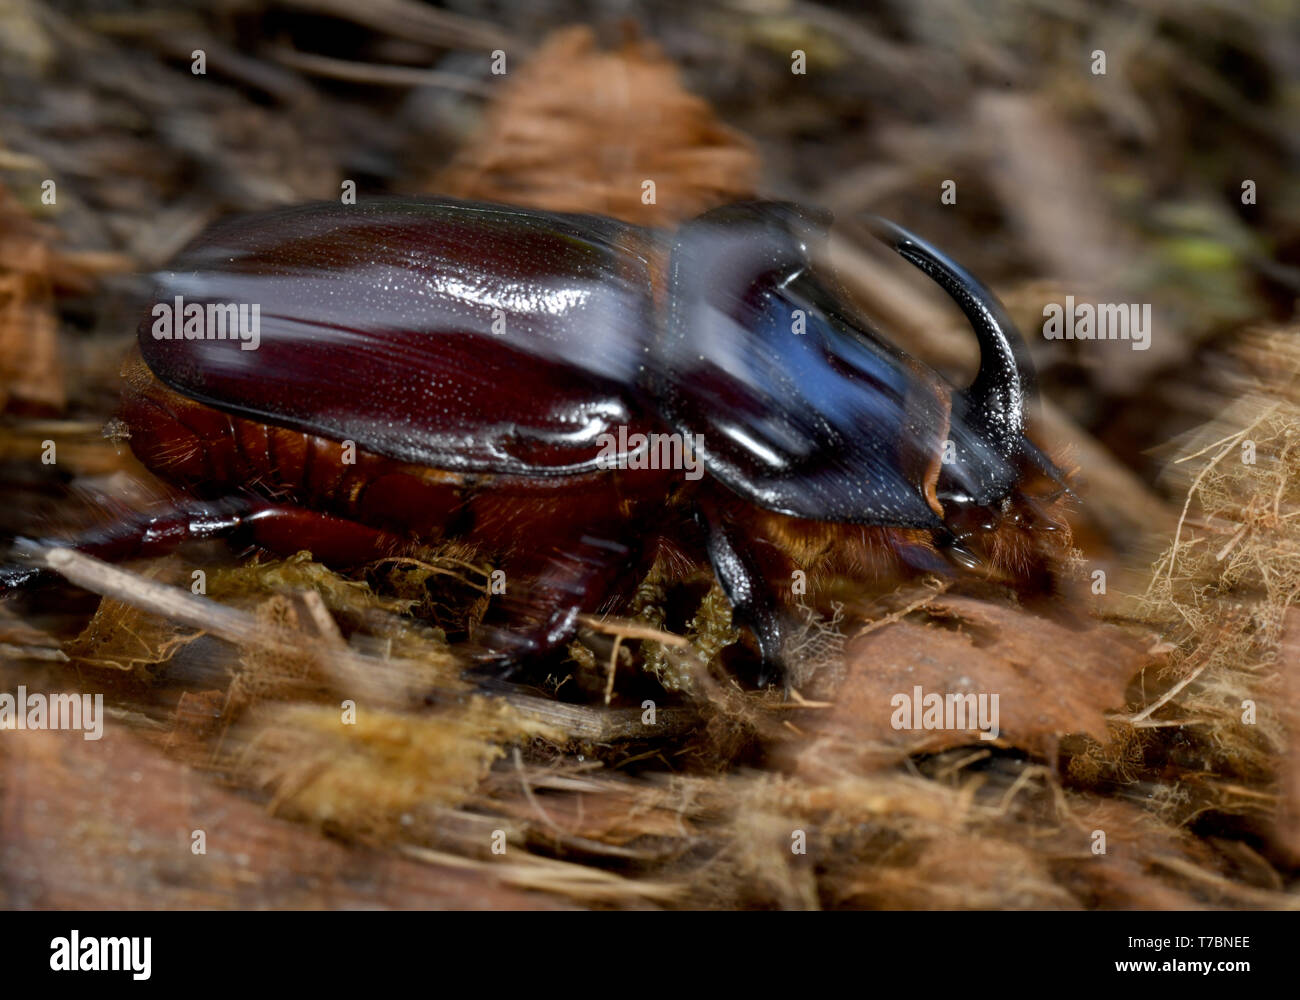 Eichwalde, Germany. 05th May, 2019. A male rhinoceros beetle (Oryctes nasicornis) runs over a compost heap. The beetles, whose larvae feed on wood and other plant fibres, live only four to five weeks. Credit: Tim Brakemeier/dpa-Zentralbild/dpa/Alamy Live News Stock Photo